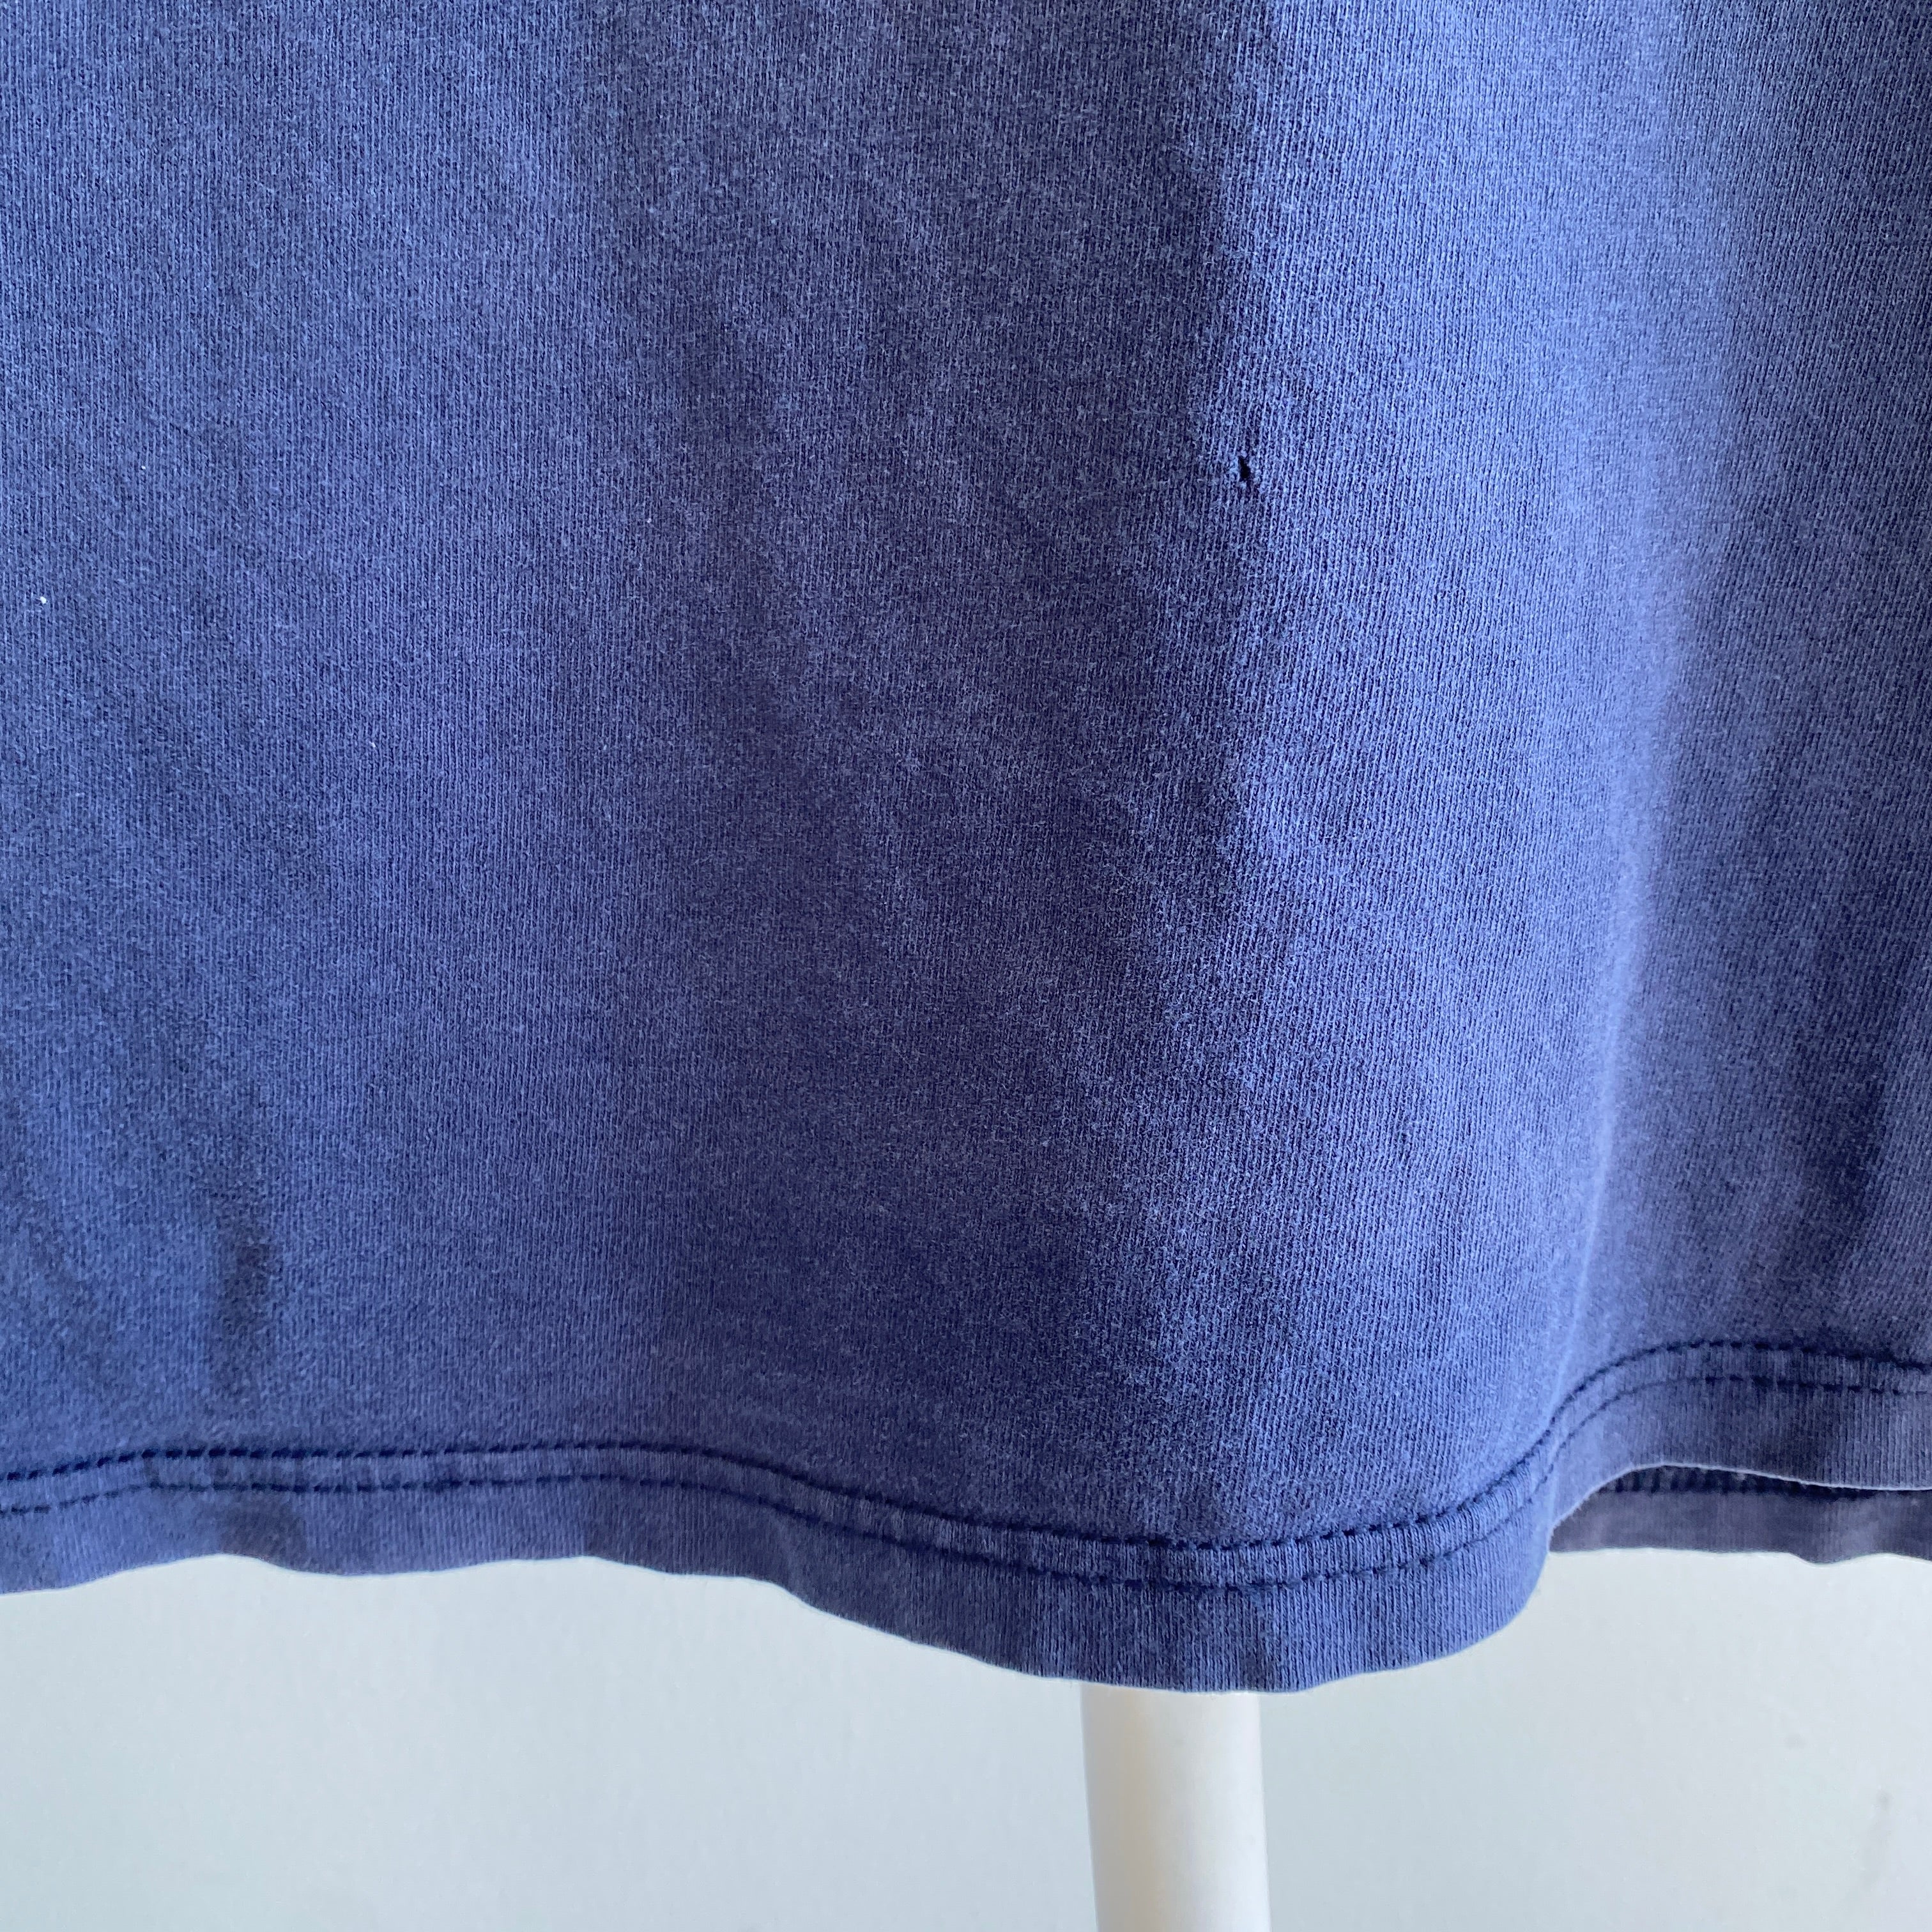 1990s Faded Navy Cotton T-Shirt - Great Blousy Sleeves